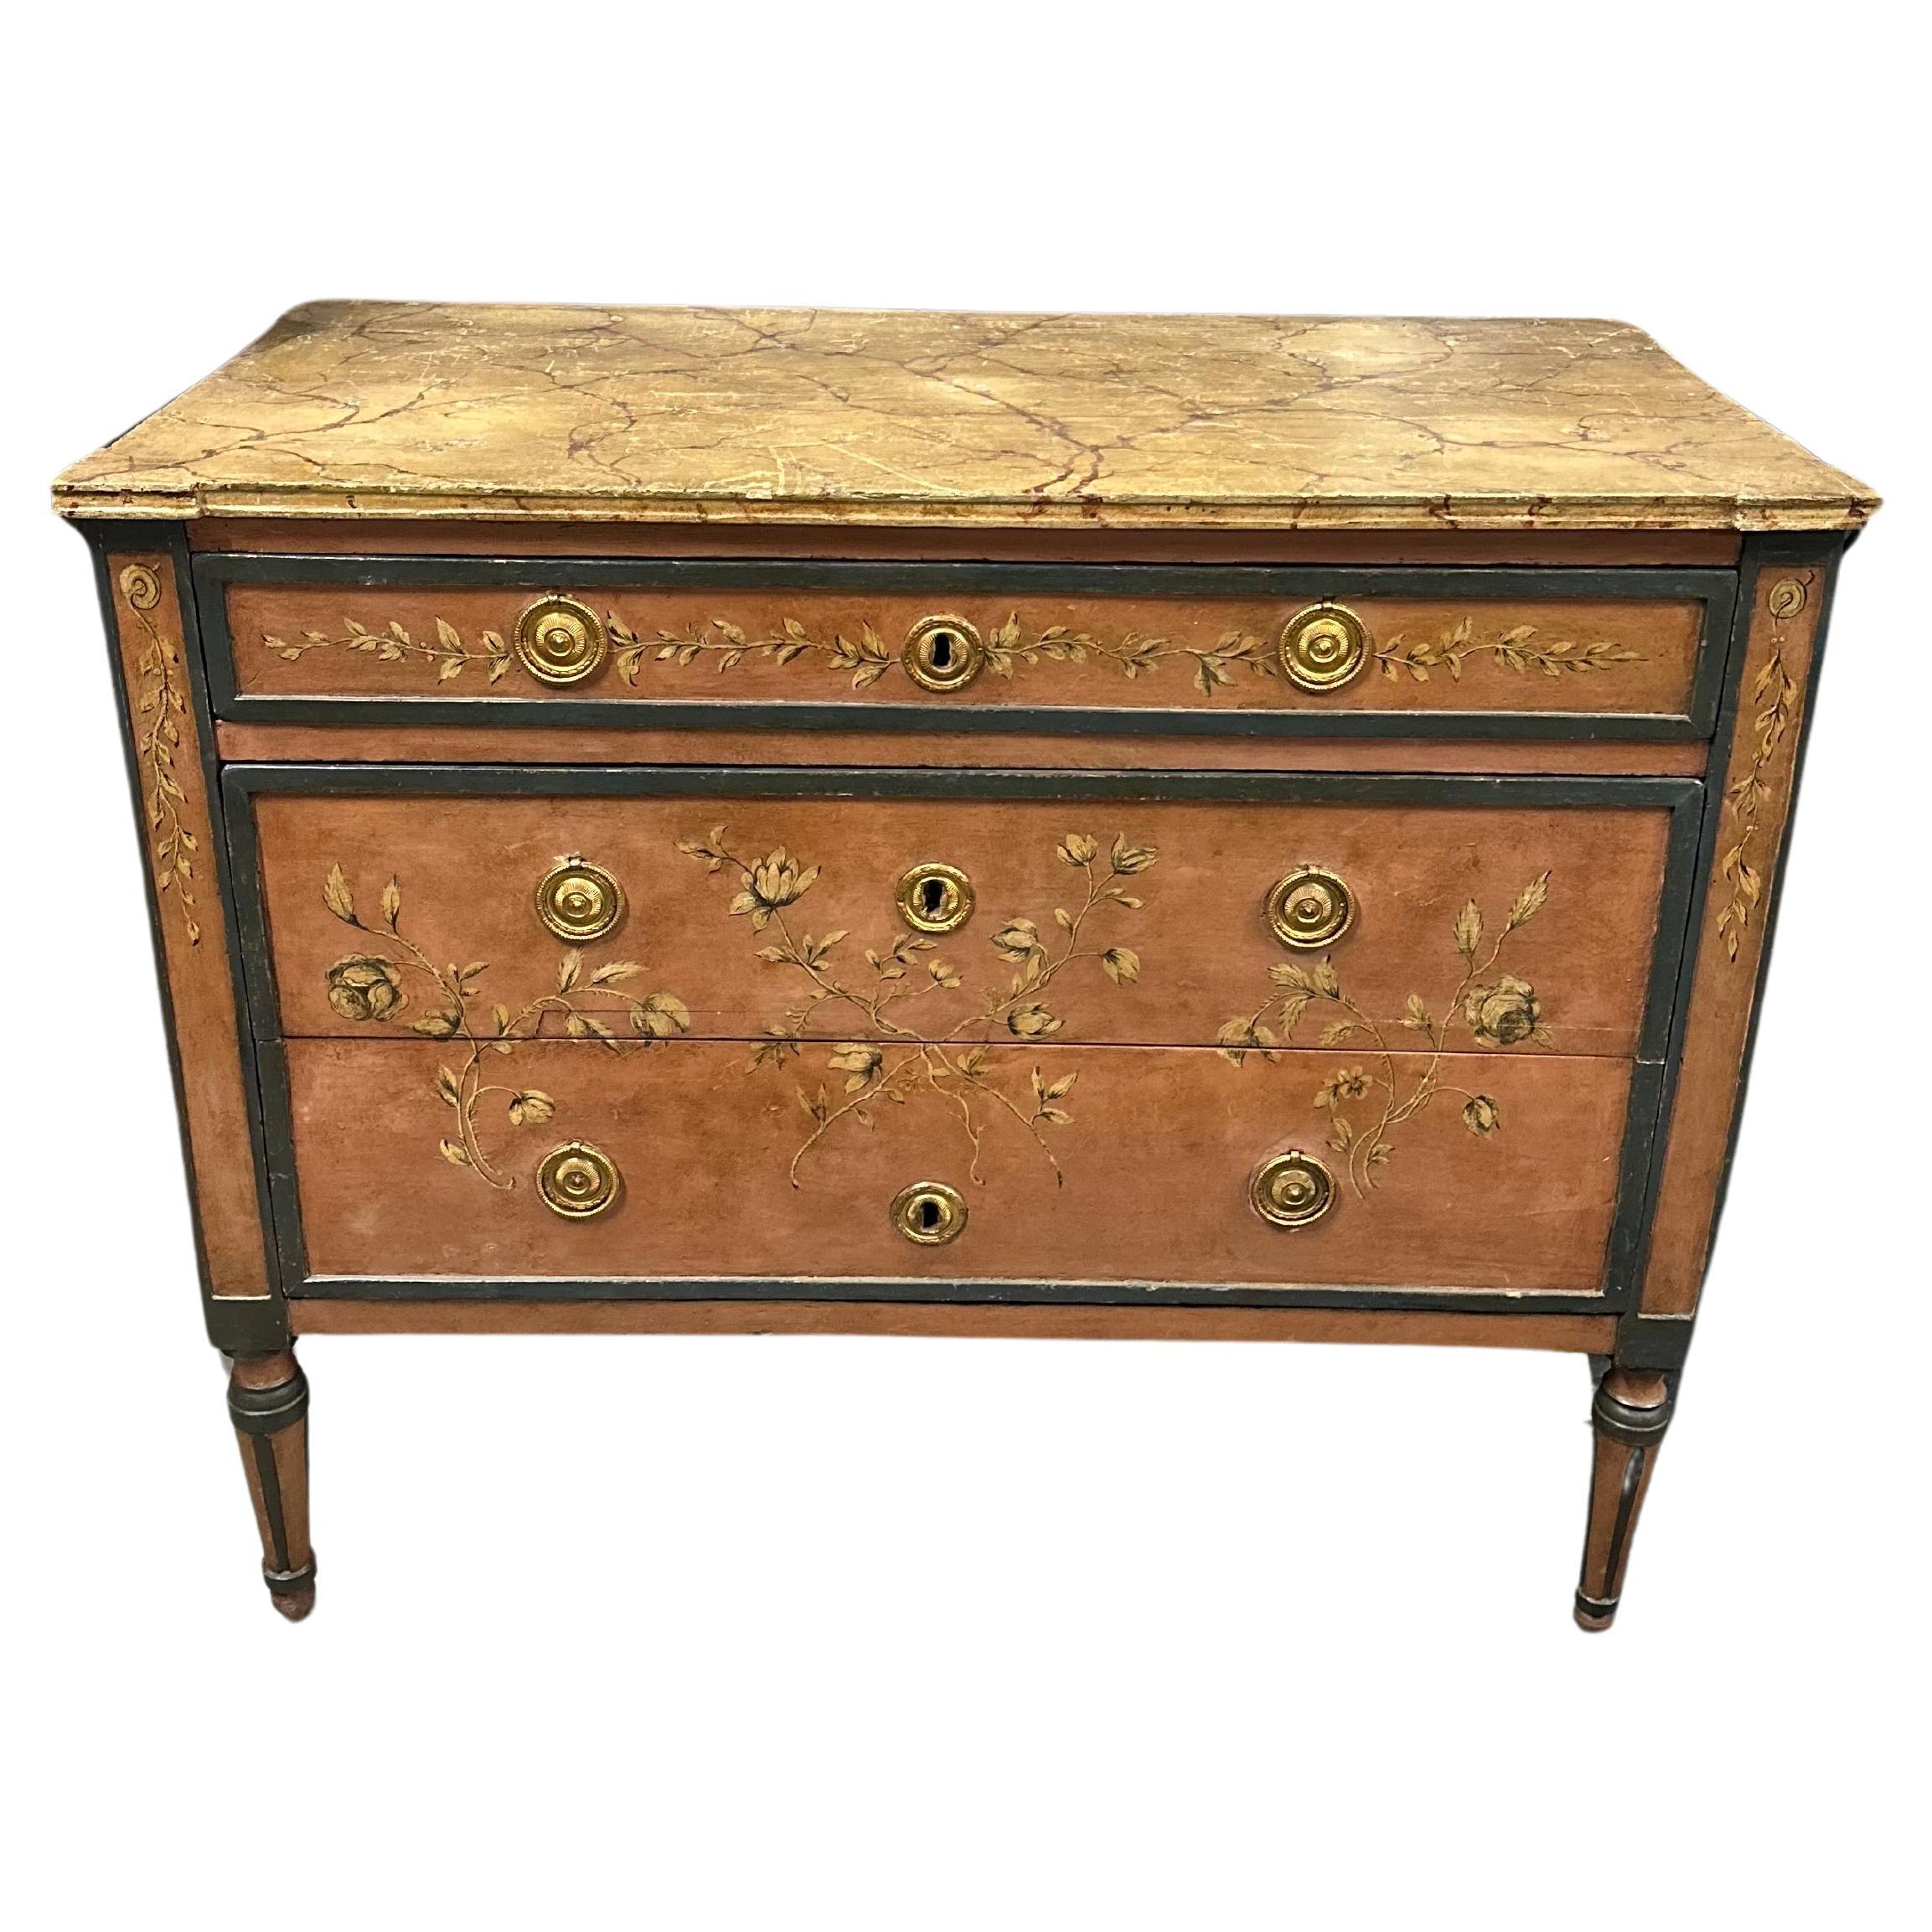 Early 20th Century Painted Italian Neoclassical Style Three Drawer Commode